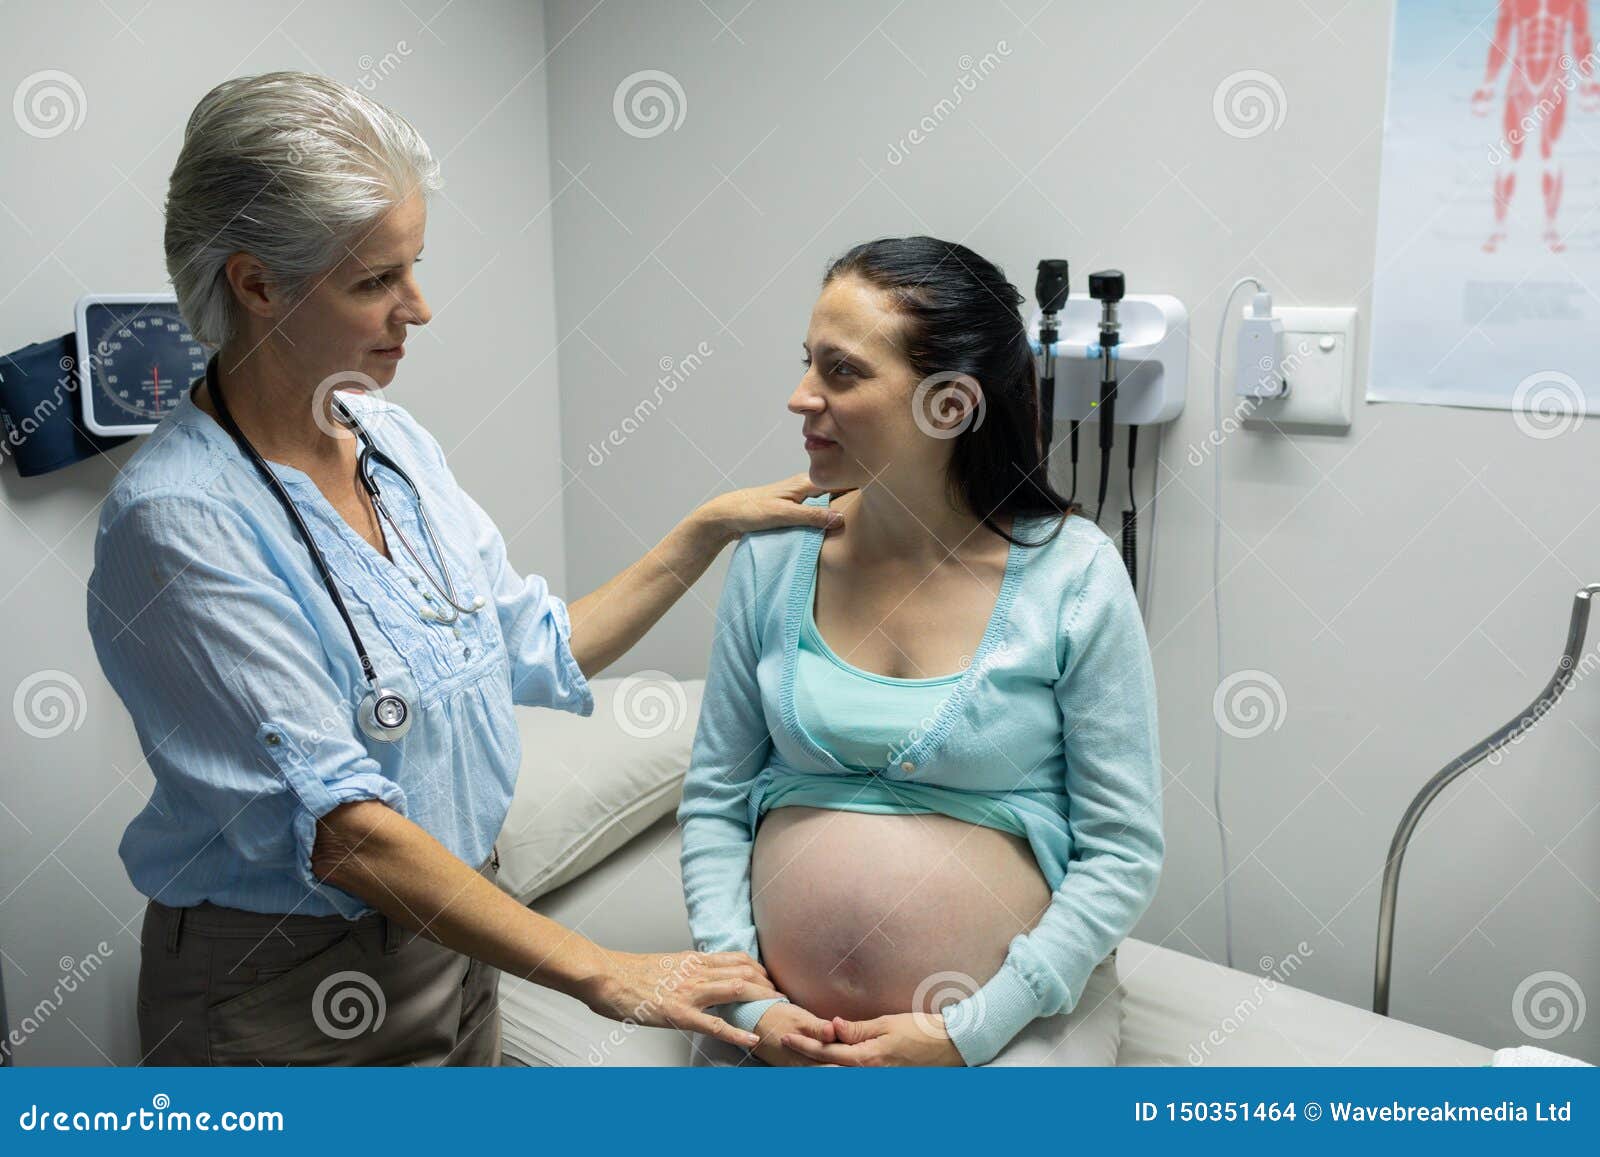 Female Doctor Talking With Pregnant Woman In Examination Room Stock 